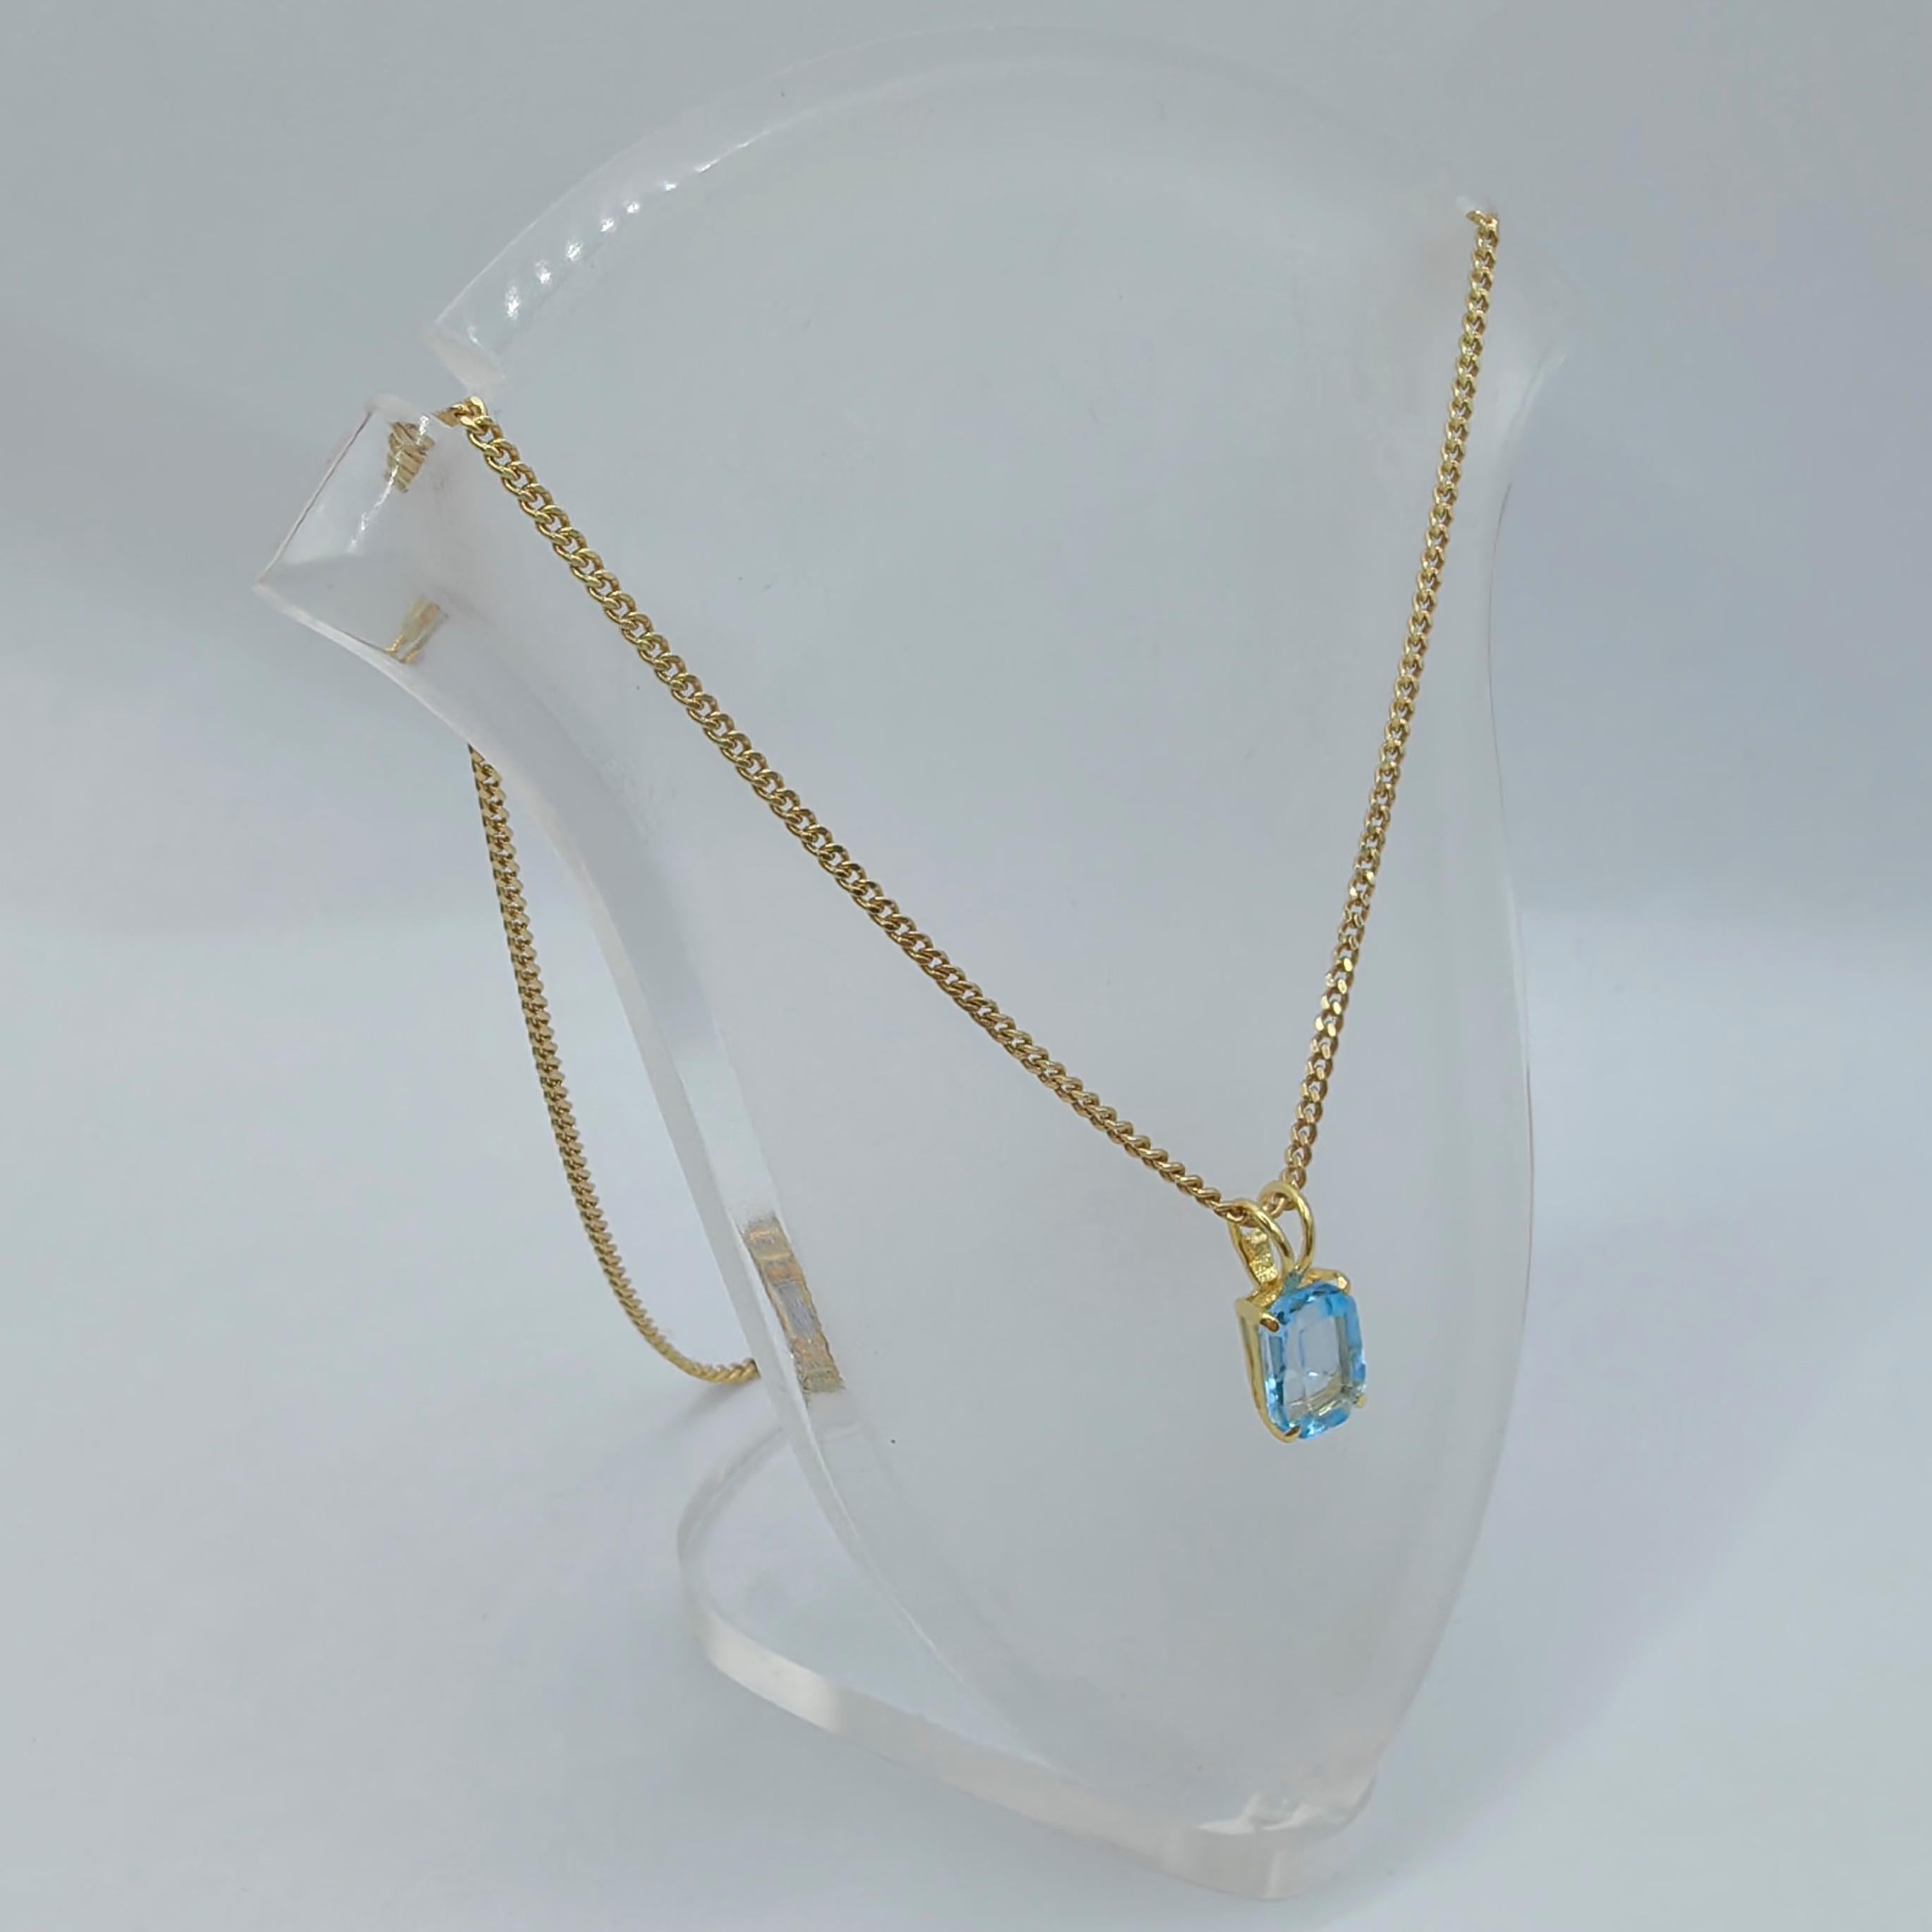 Contemporary Vintage 1980's Emerald Cut Blue Topaz Necklace Pendant in 14K Yellow Gold #2 For Sale